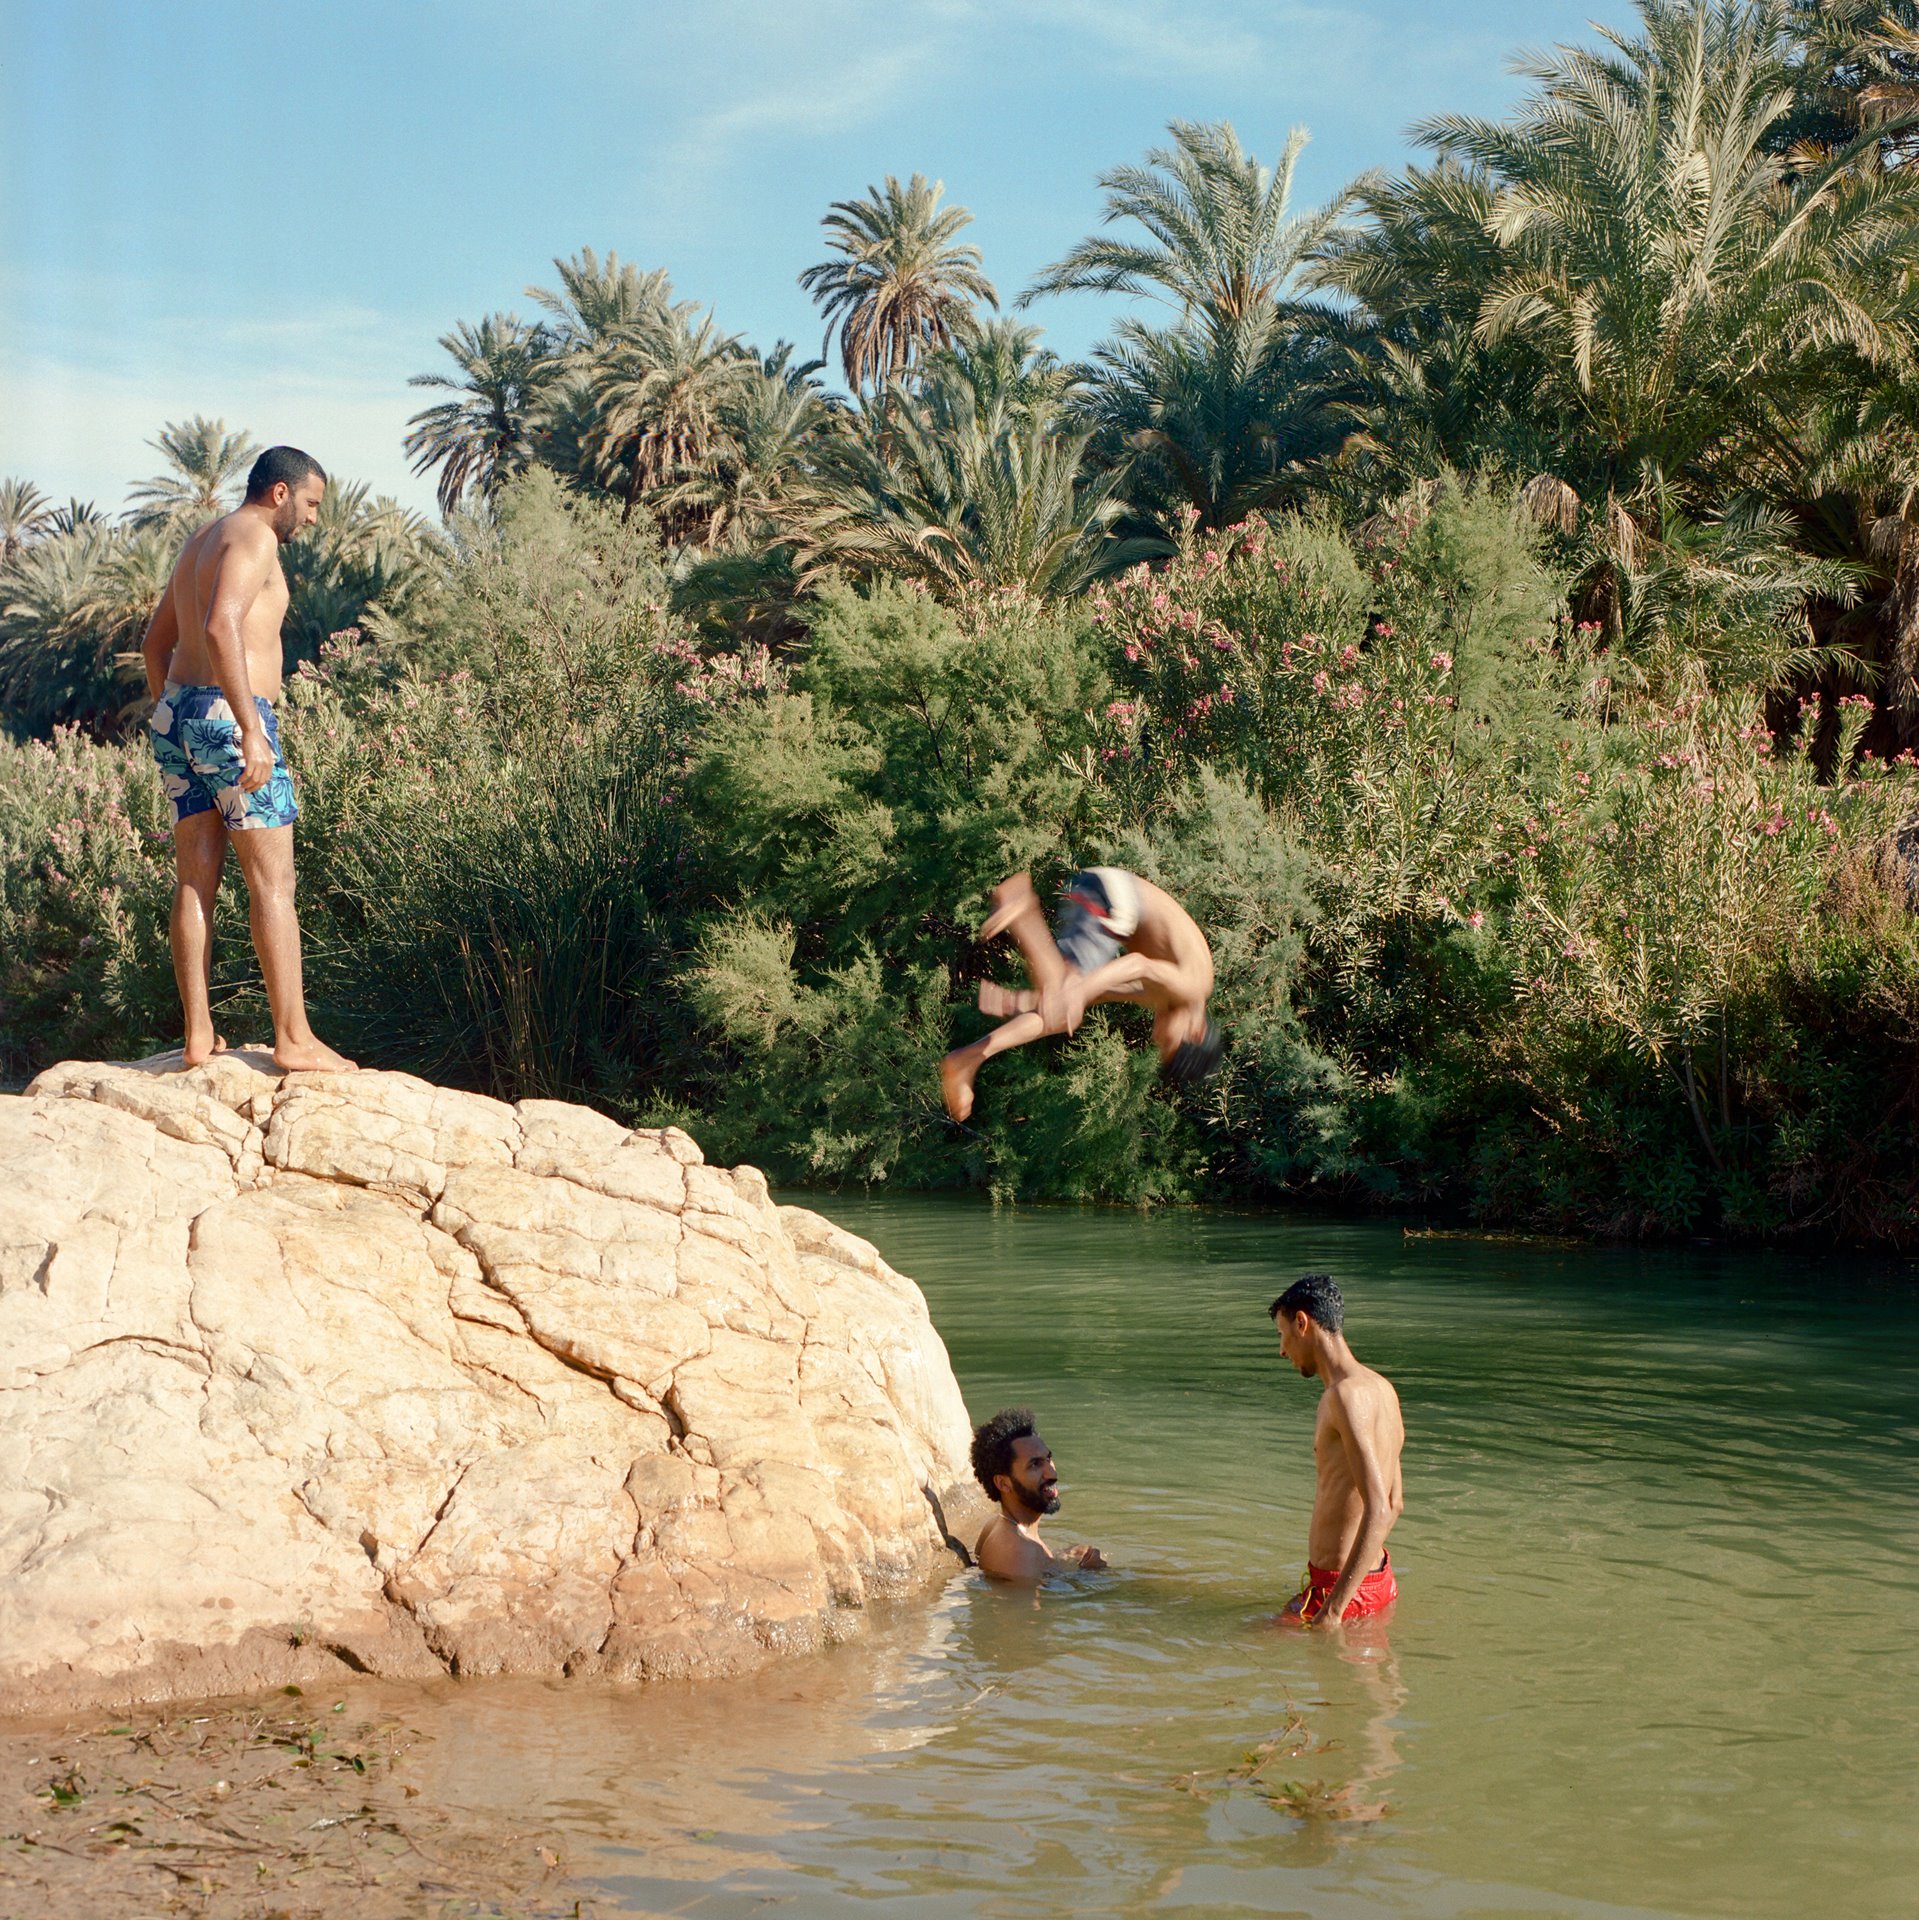 Youths swim in Oued Sayad, a dam at Taghjijt Oasis, in southern Morocco.